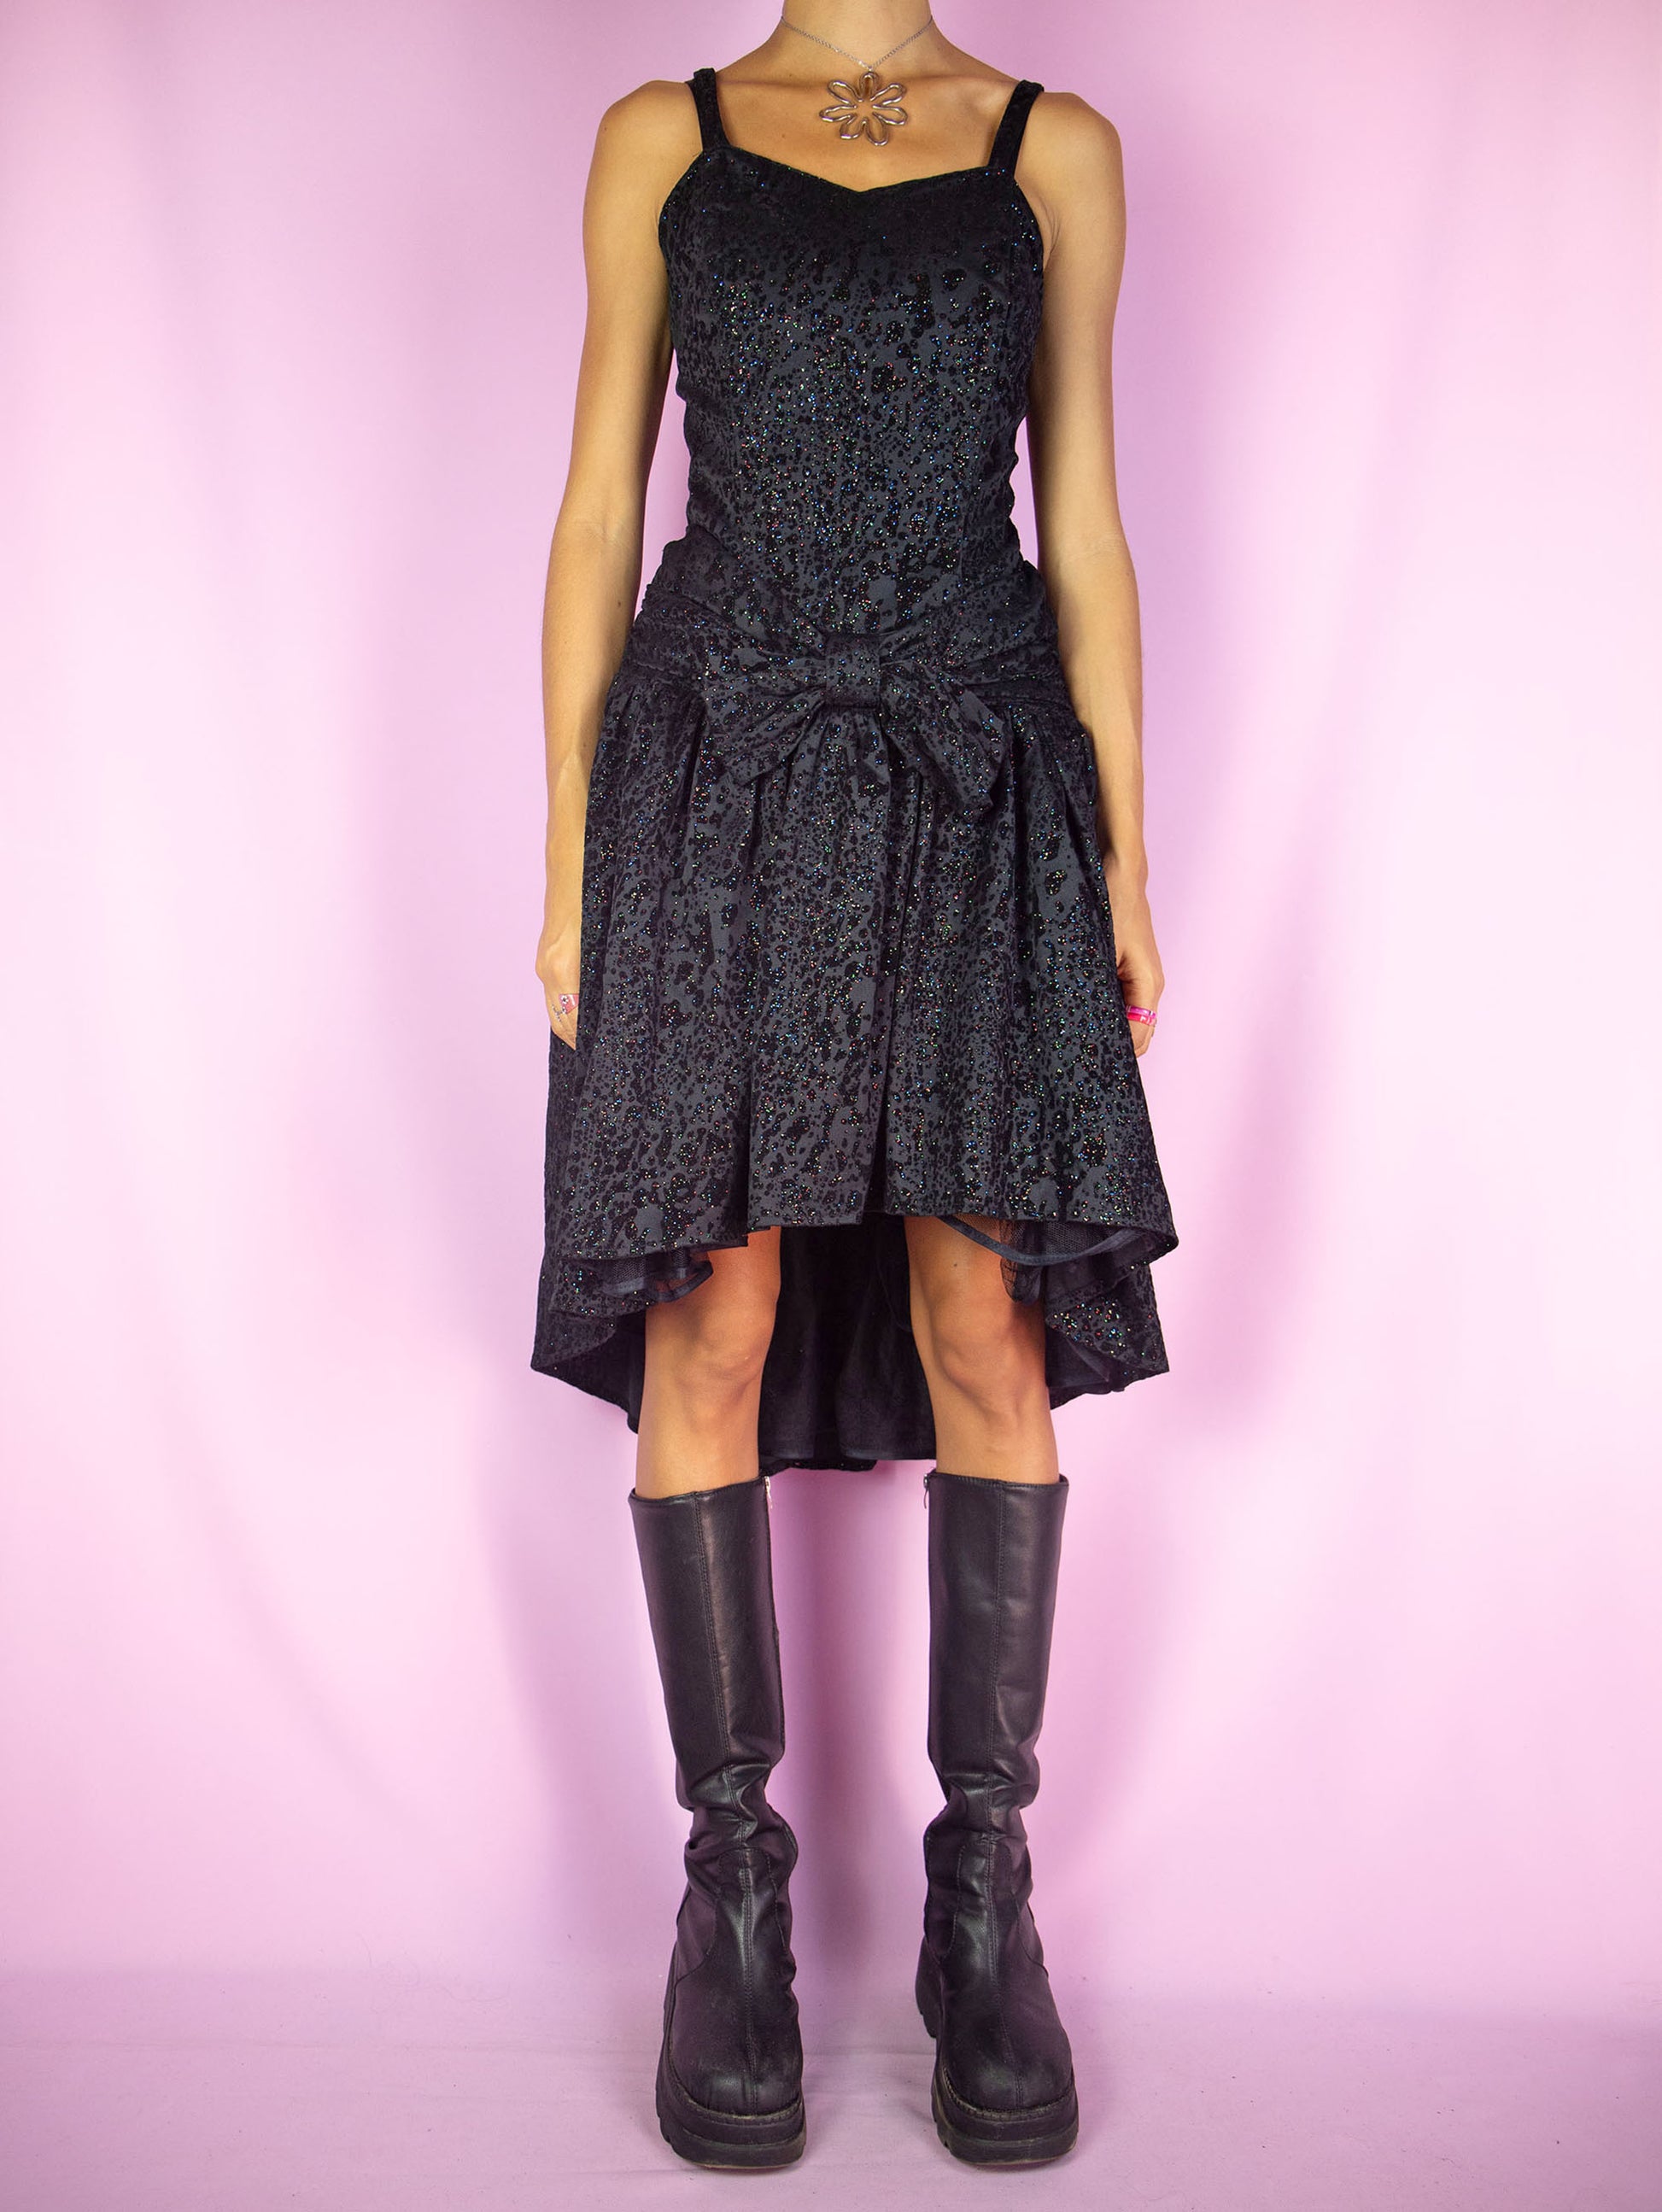 The Vintage 90s Party Black Mini Dress is an asymmetrical black dress with a shirred back, bow on the front, tulle hem and velvet and multicolored shiny glitter details. Whimsygoth 1990s midi dress.